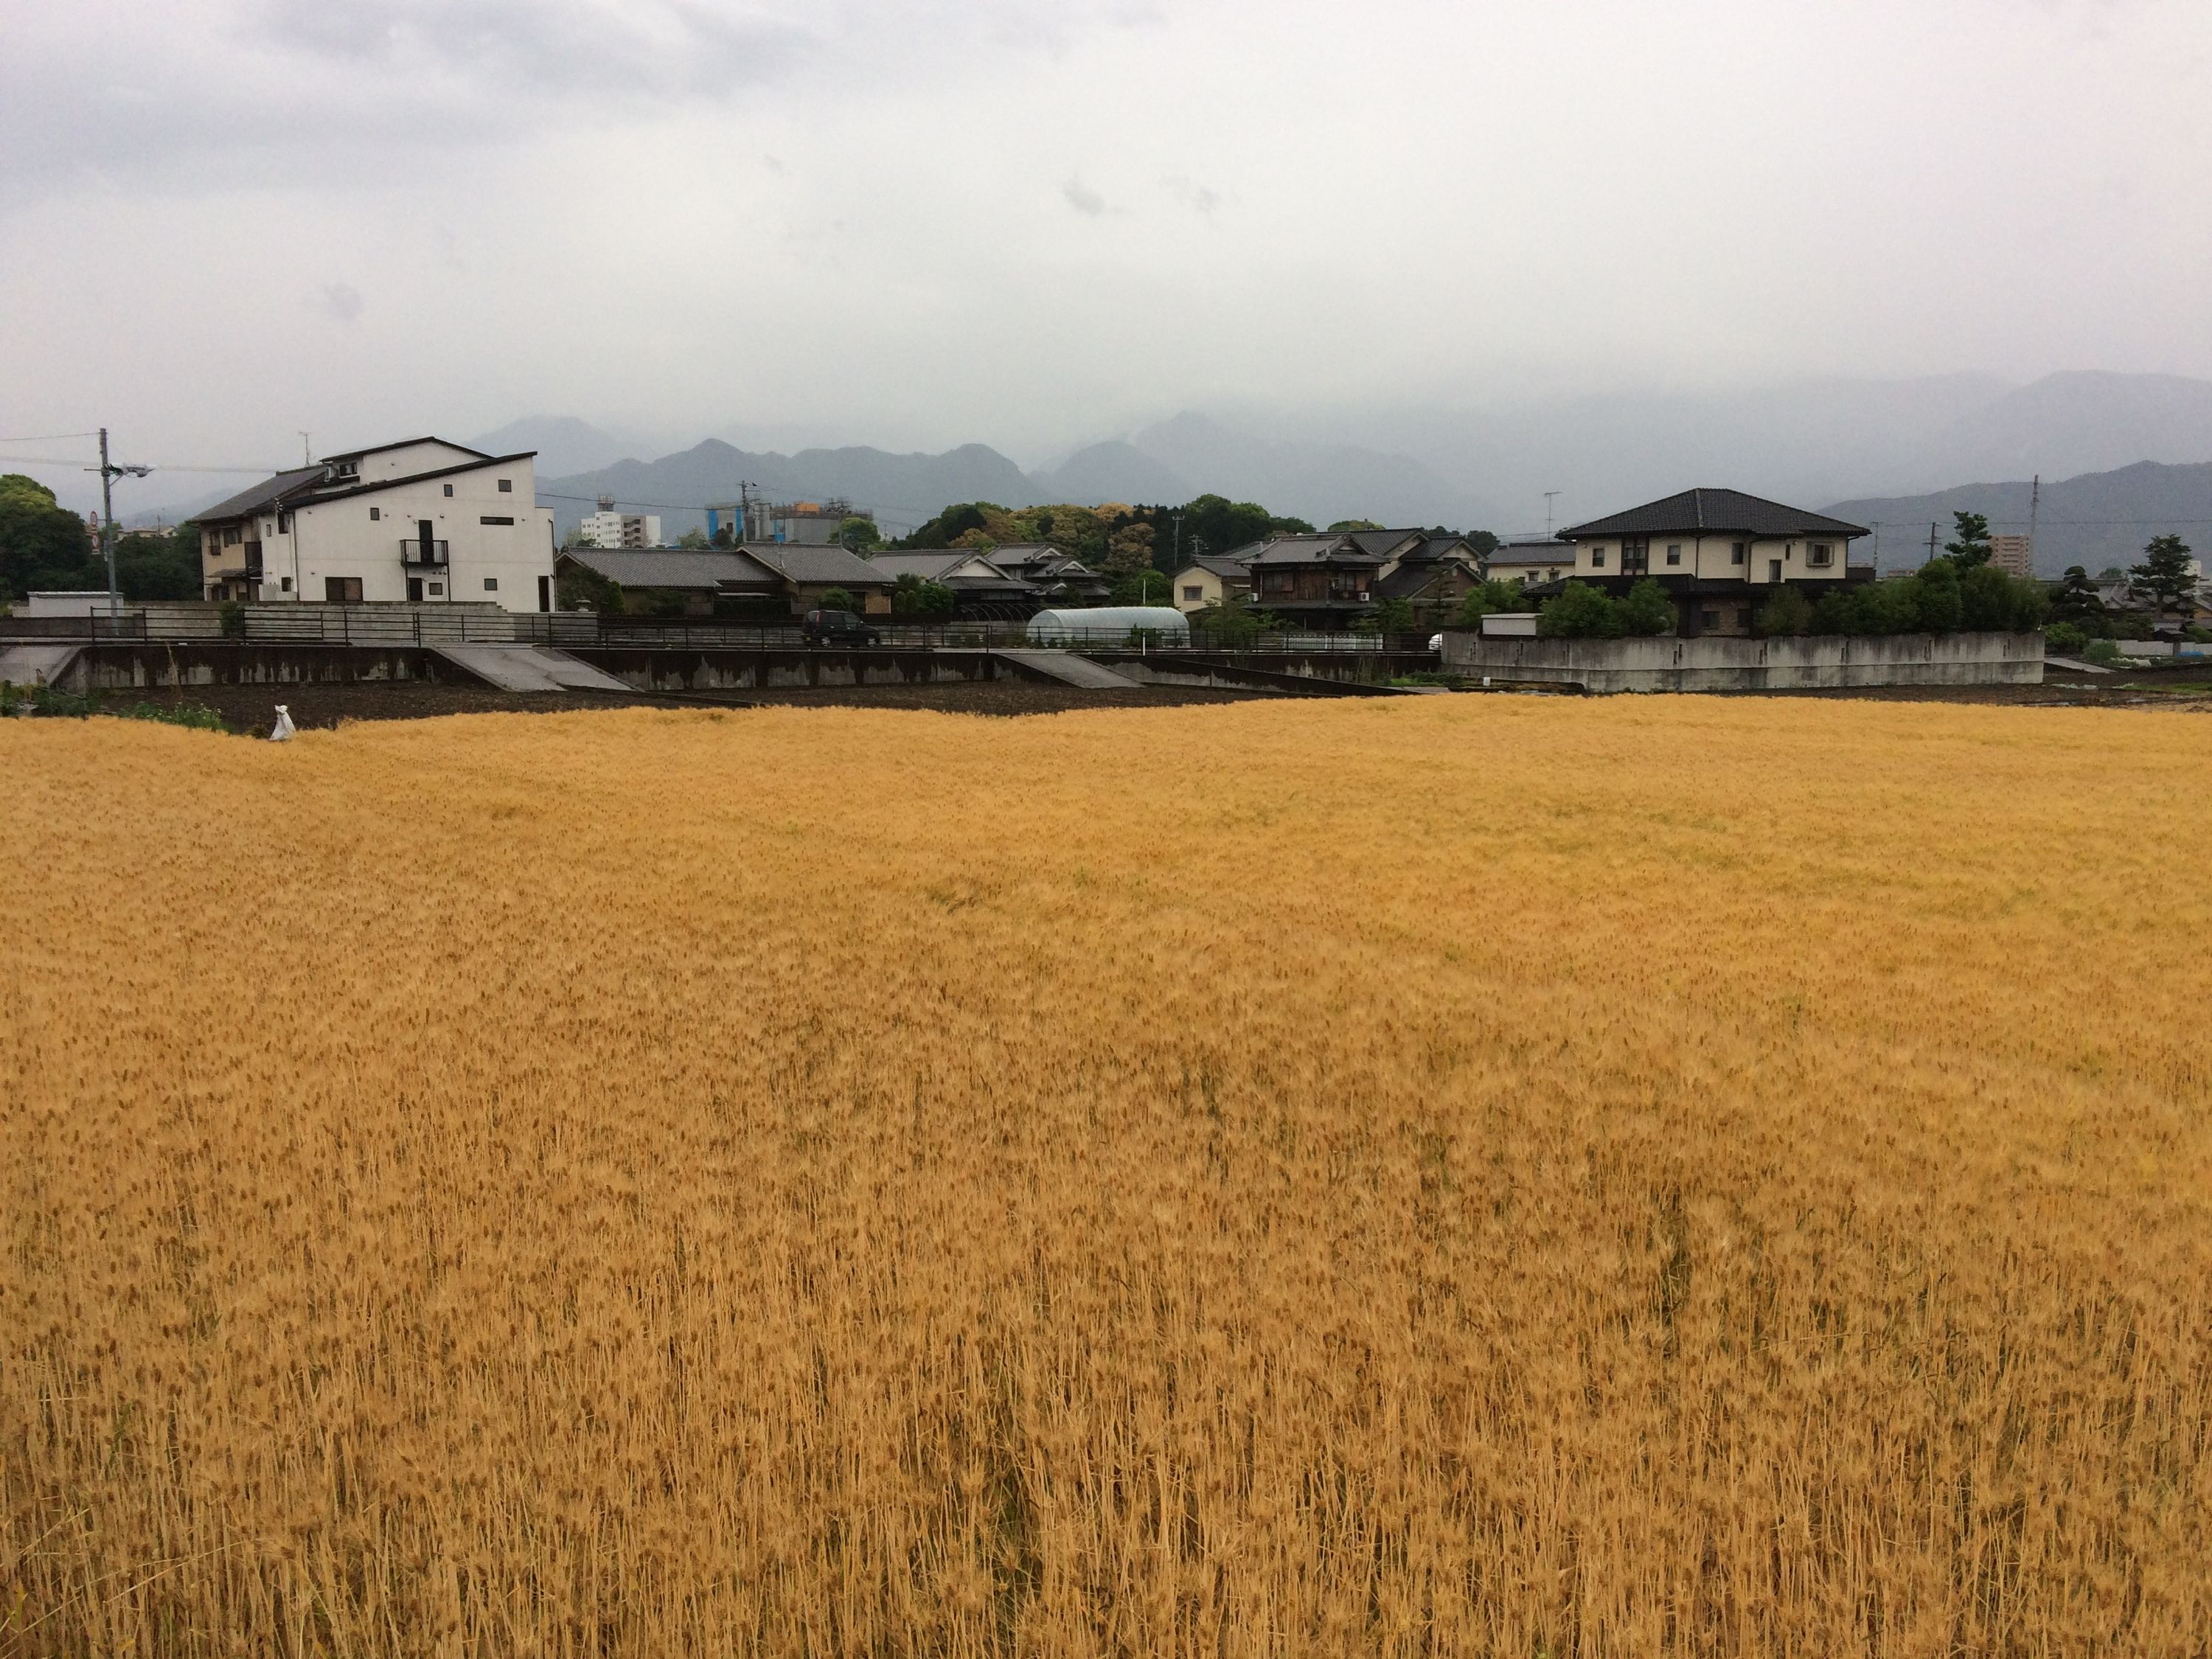 A field of golden grass-like plants in front of houses and mountains half-obscured by swirling grey clouds.